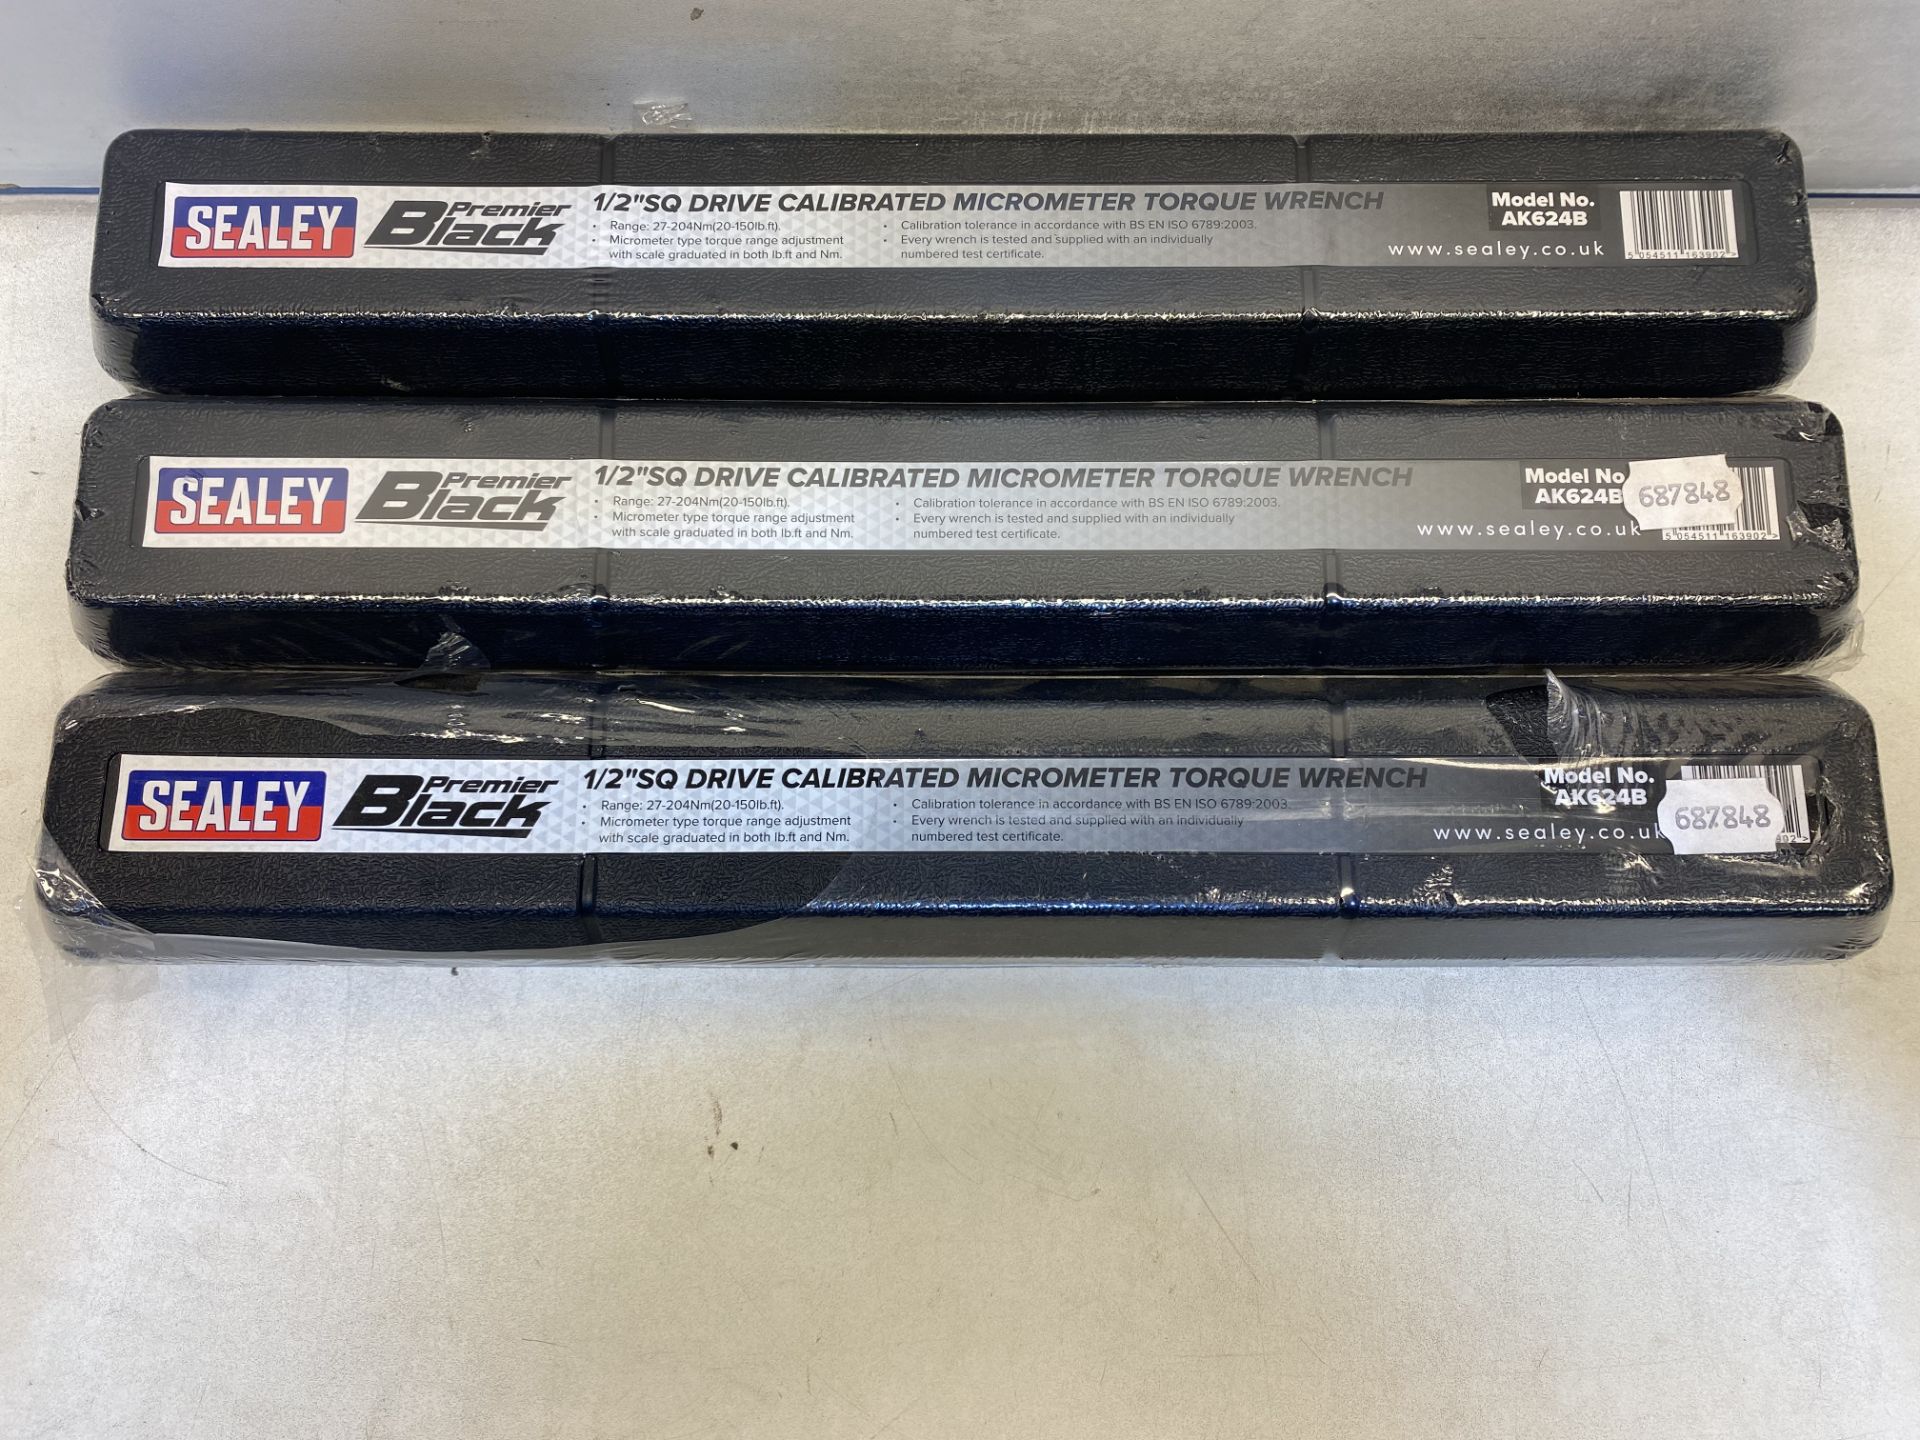 3 x Sealey AK624B Micrometer Torque Wrench 1/2in Sq Drive Calibrated Black Series | RRP £126